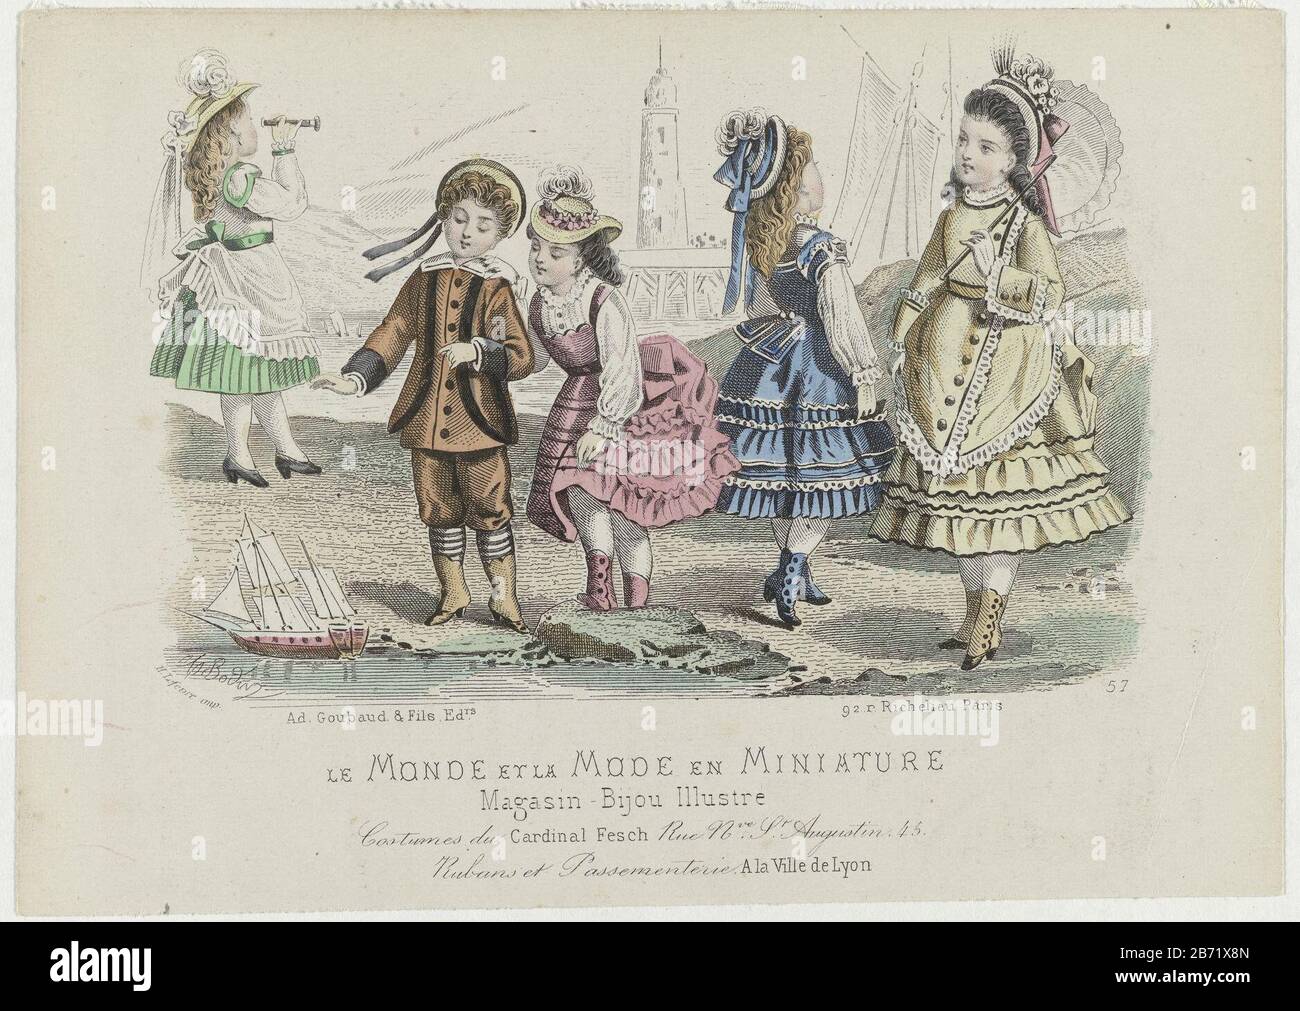 Le Monde Et La Mode En Miniature 1873 No 57 Costumes Du Cardinal Fesch Four Girls And A Boy On The Beach Wearing Clothes From Cardinal Fesch With Ribbon And Trimmings Ville